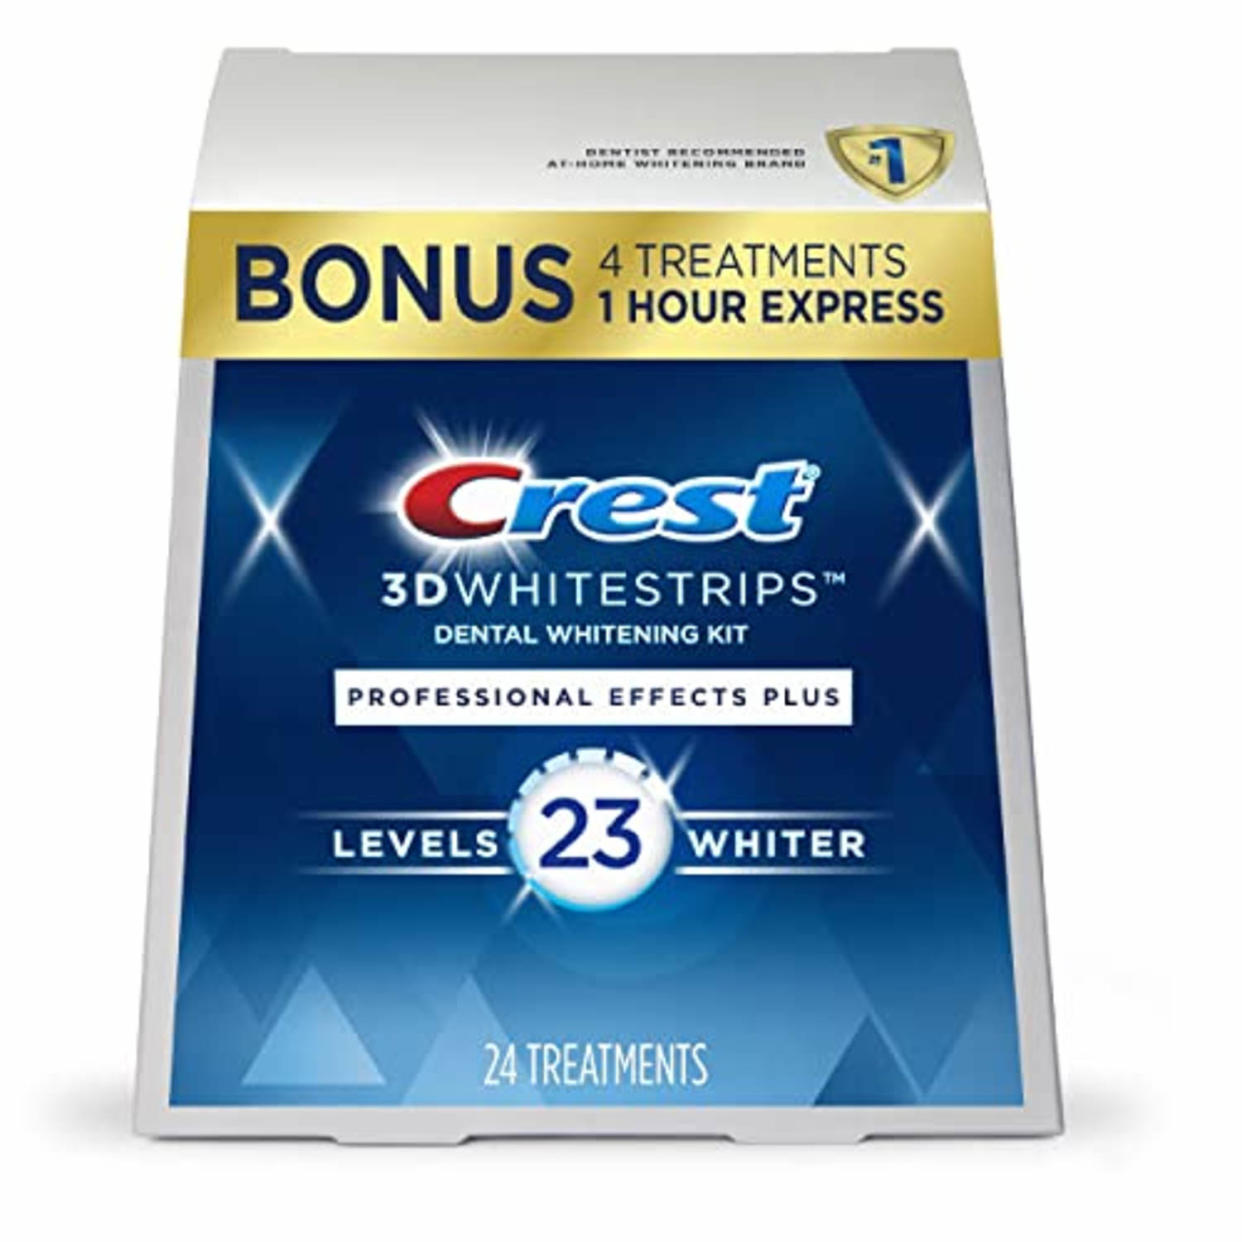 Crest 3D Whitestrips, Professional Effects Plus, Teeth Whitening Strip Kit, 48 Strips (24 Count Pack) (AMAZON)